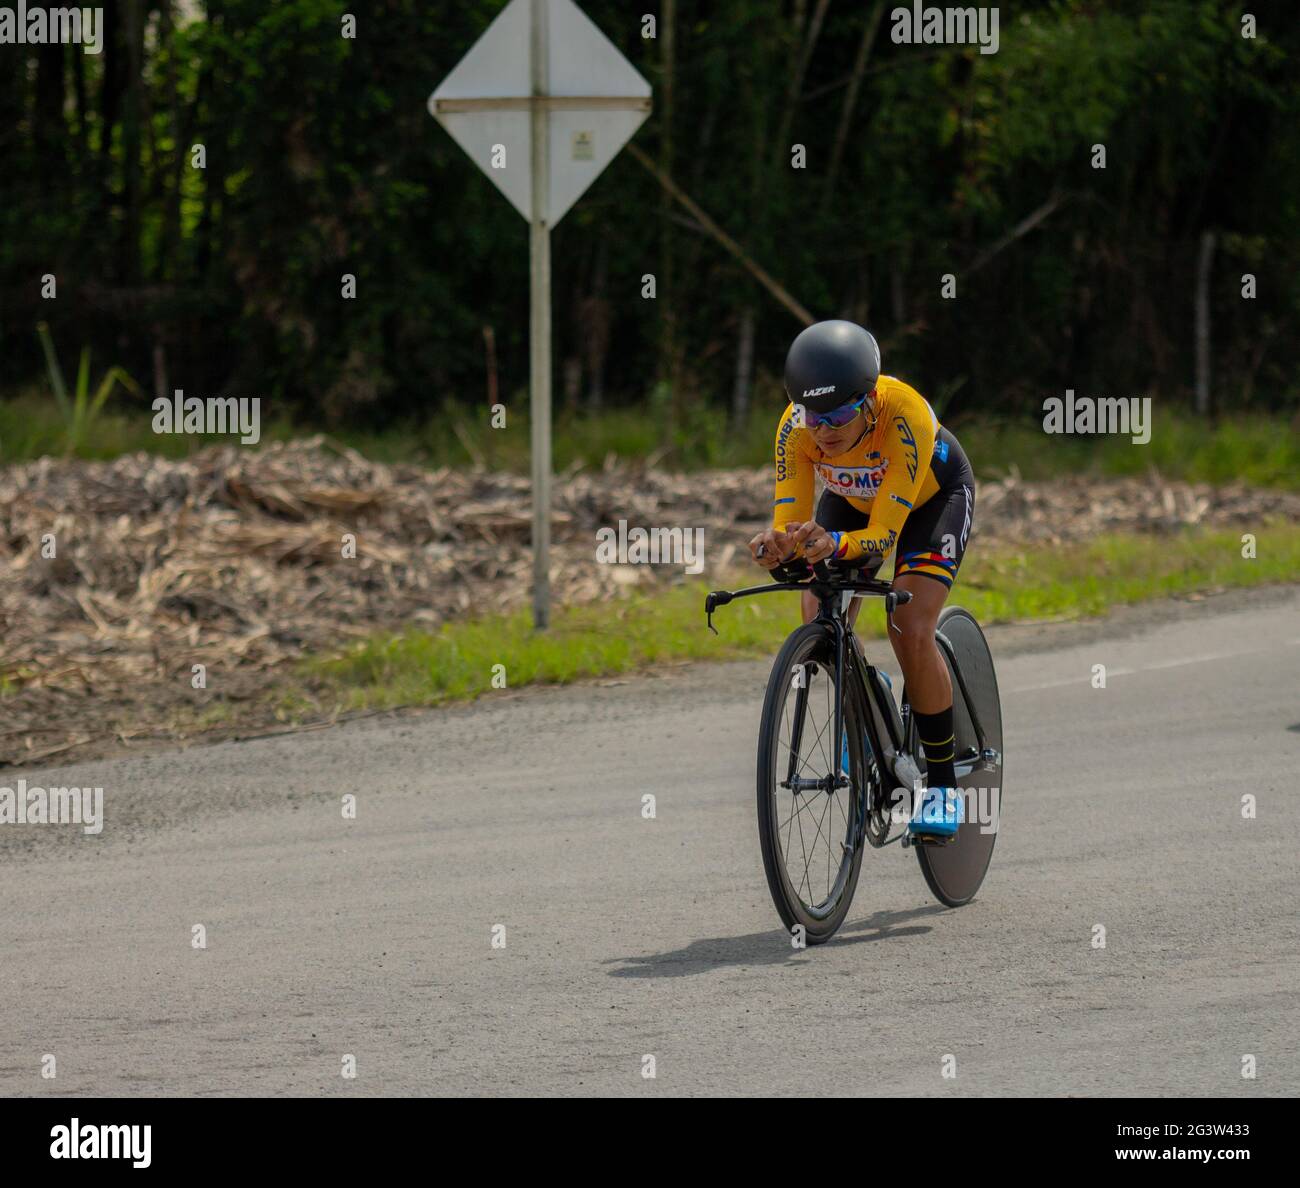 Virginia, Colombia. 17th June, 2021. A member of the 'Colombia Tierra de Atletas' team during the time trials at Virginia, Risaralda, Colombia of the Colombian National Road Race Championship, 2021, on June 17, 2021. Credit: Long Visual Press/Alamy Live News Stock Photo